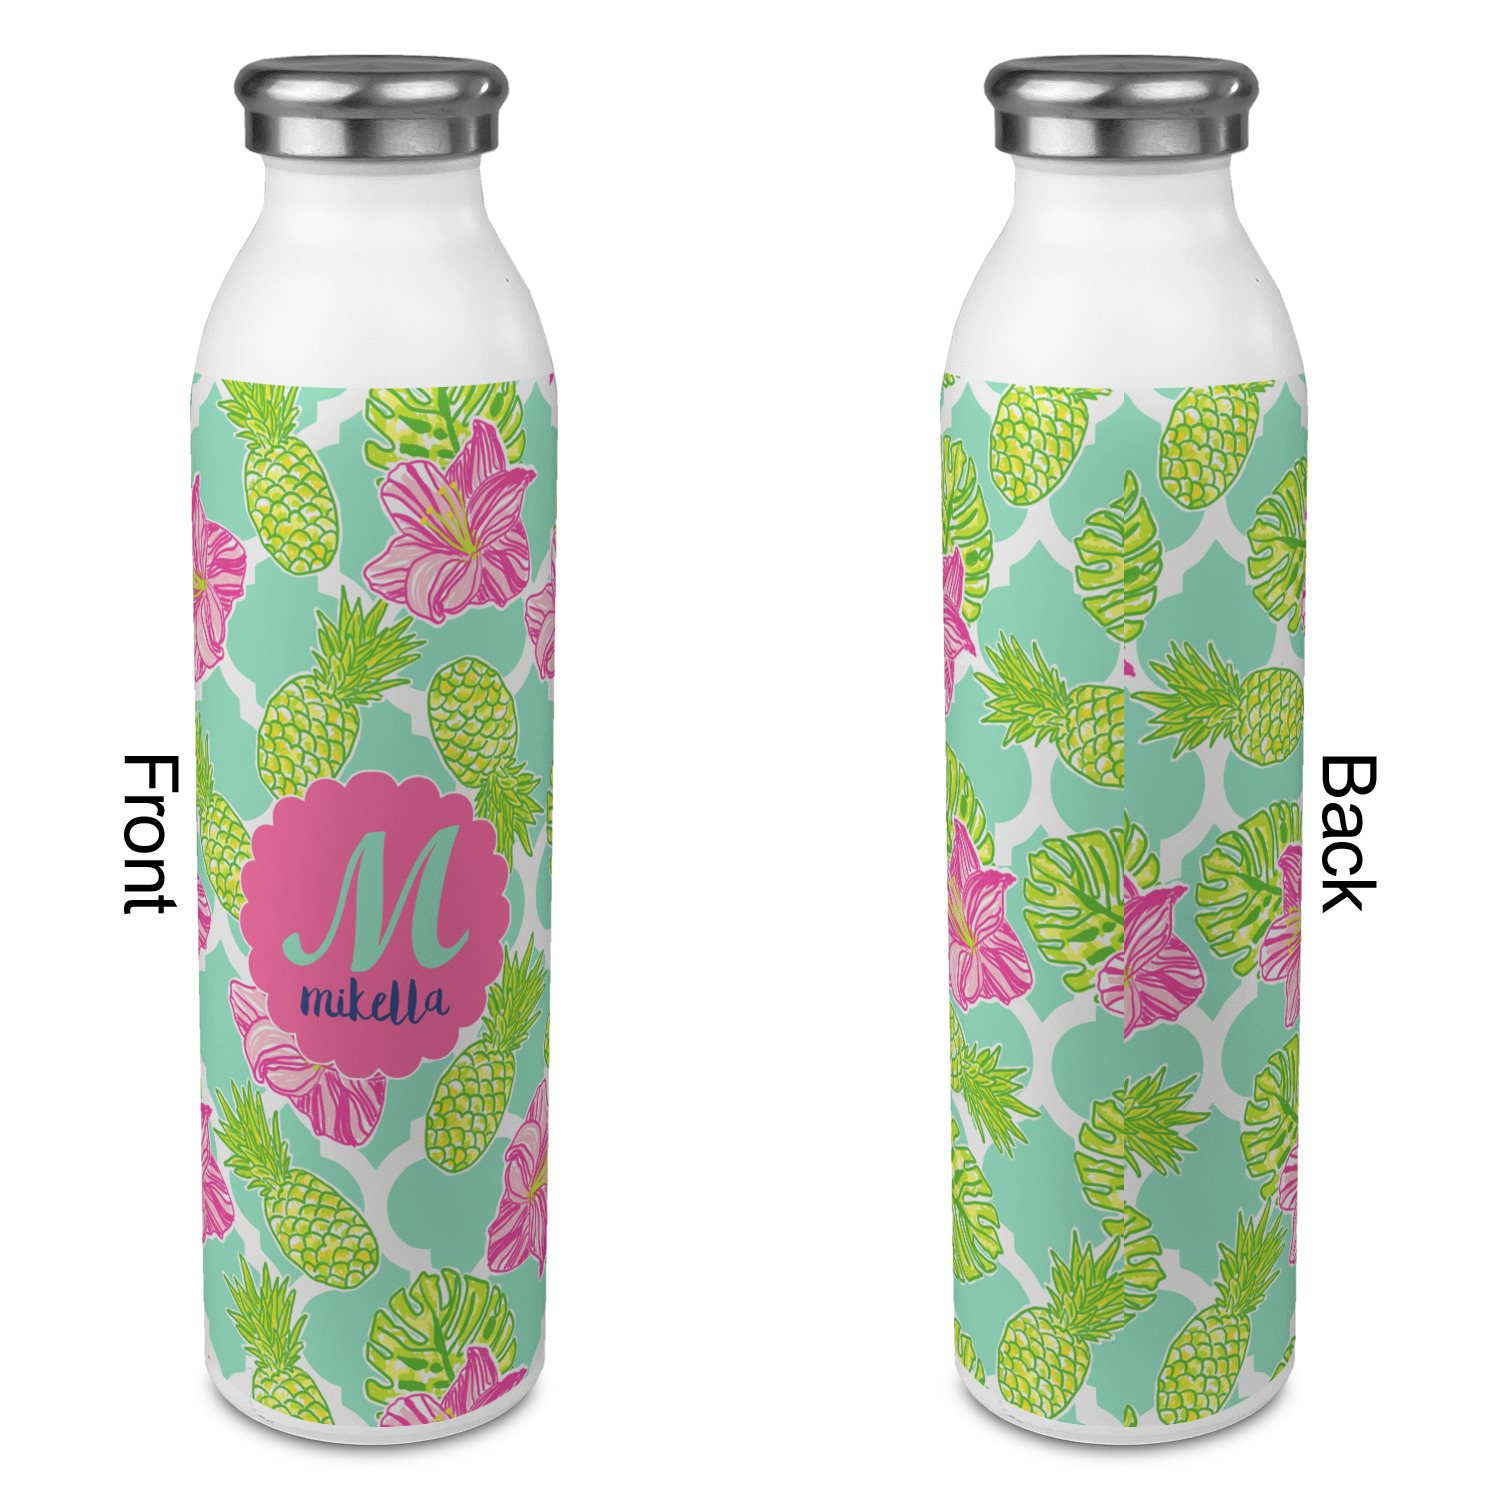 https://www.youcustomizeit.com/common/MAKE/1112610/Preppy-Hibiscus-20oz-Water-Bottles-Full-Print-Approval.jpg?lm=1665529445